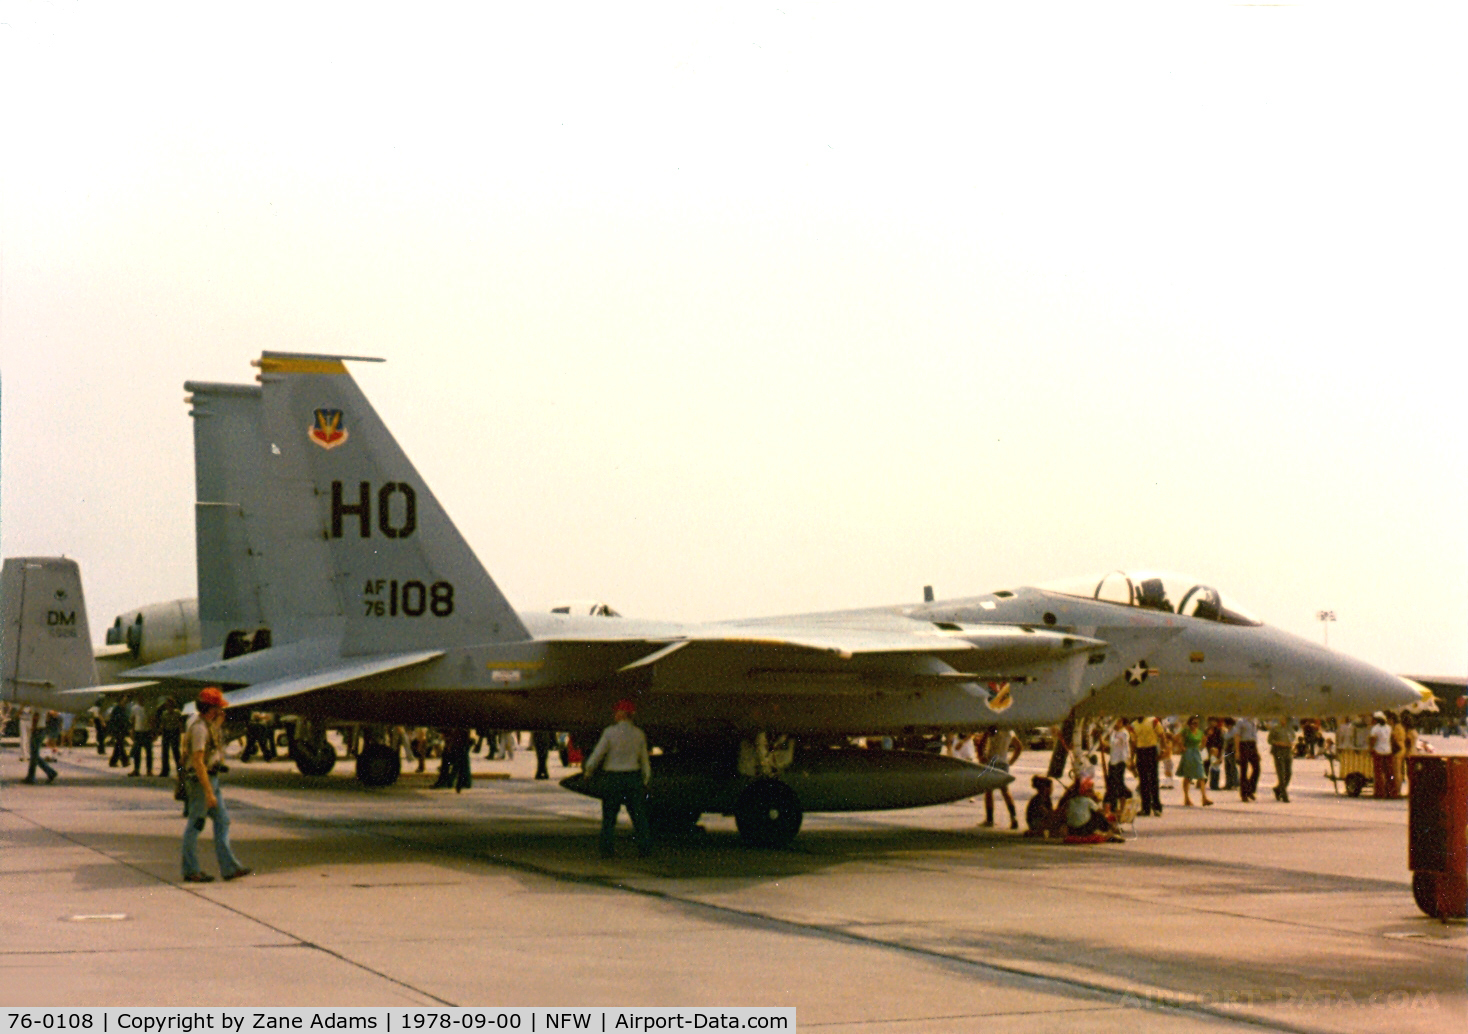 76-0108, 1976 McDonnell Douglas F-15A Eagle C/N 0310/A260, At Carswell Air Force Base 1978 Airshow - Currently preserved at Kelly AFB, TX